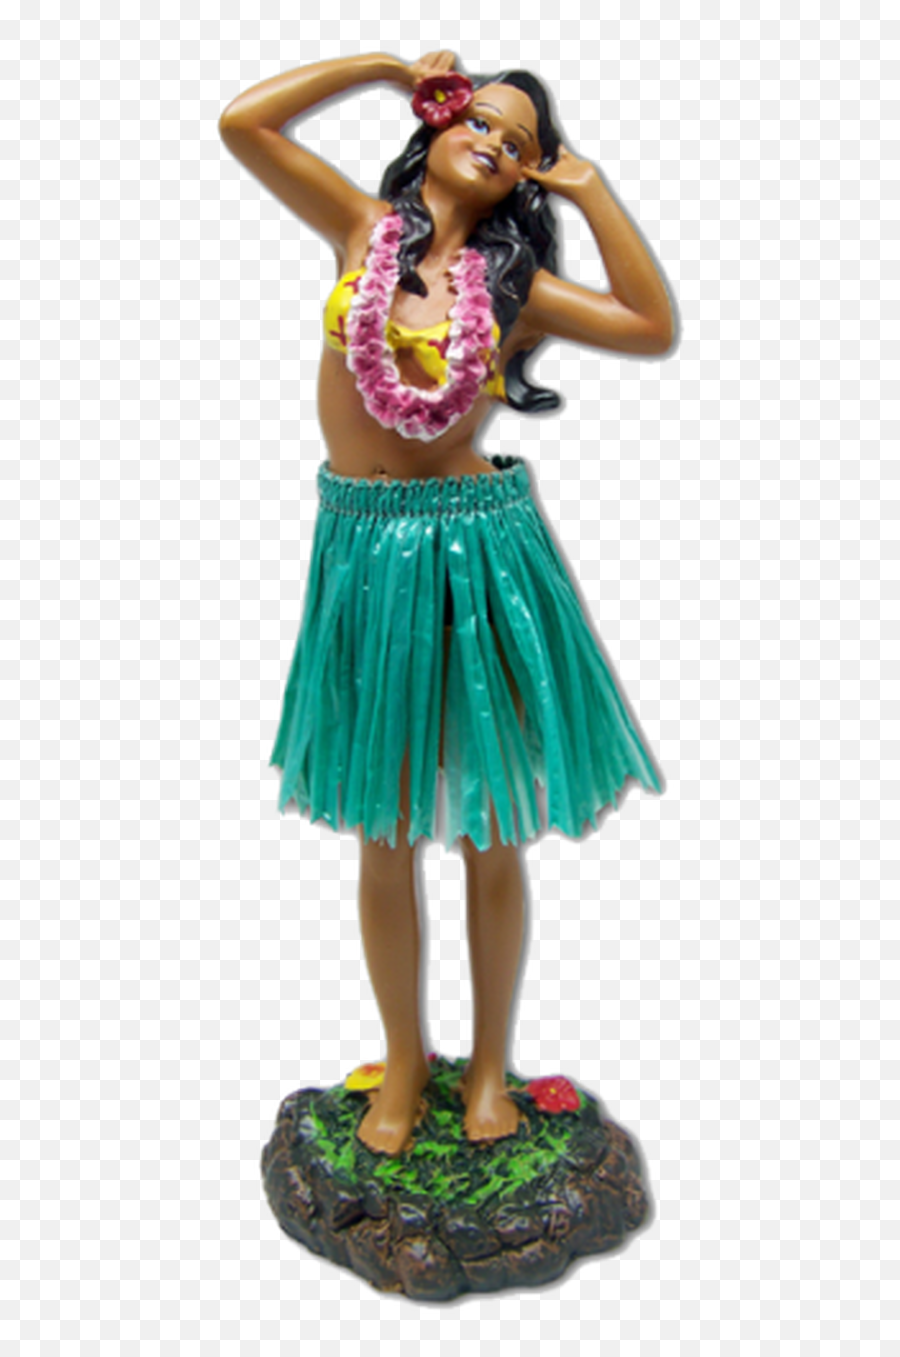 Dashboard Bobble Doll - Doll Emoji,Emoticons With Hula Girls And Leis